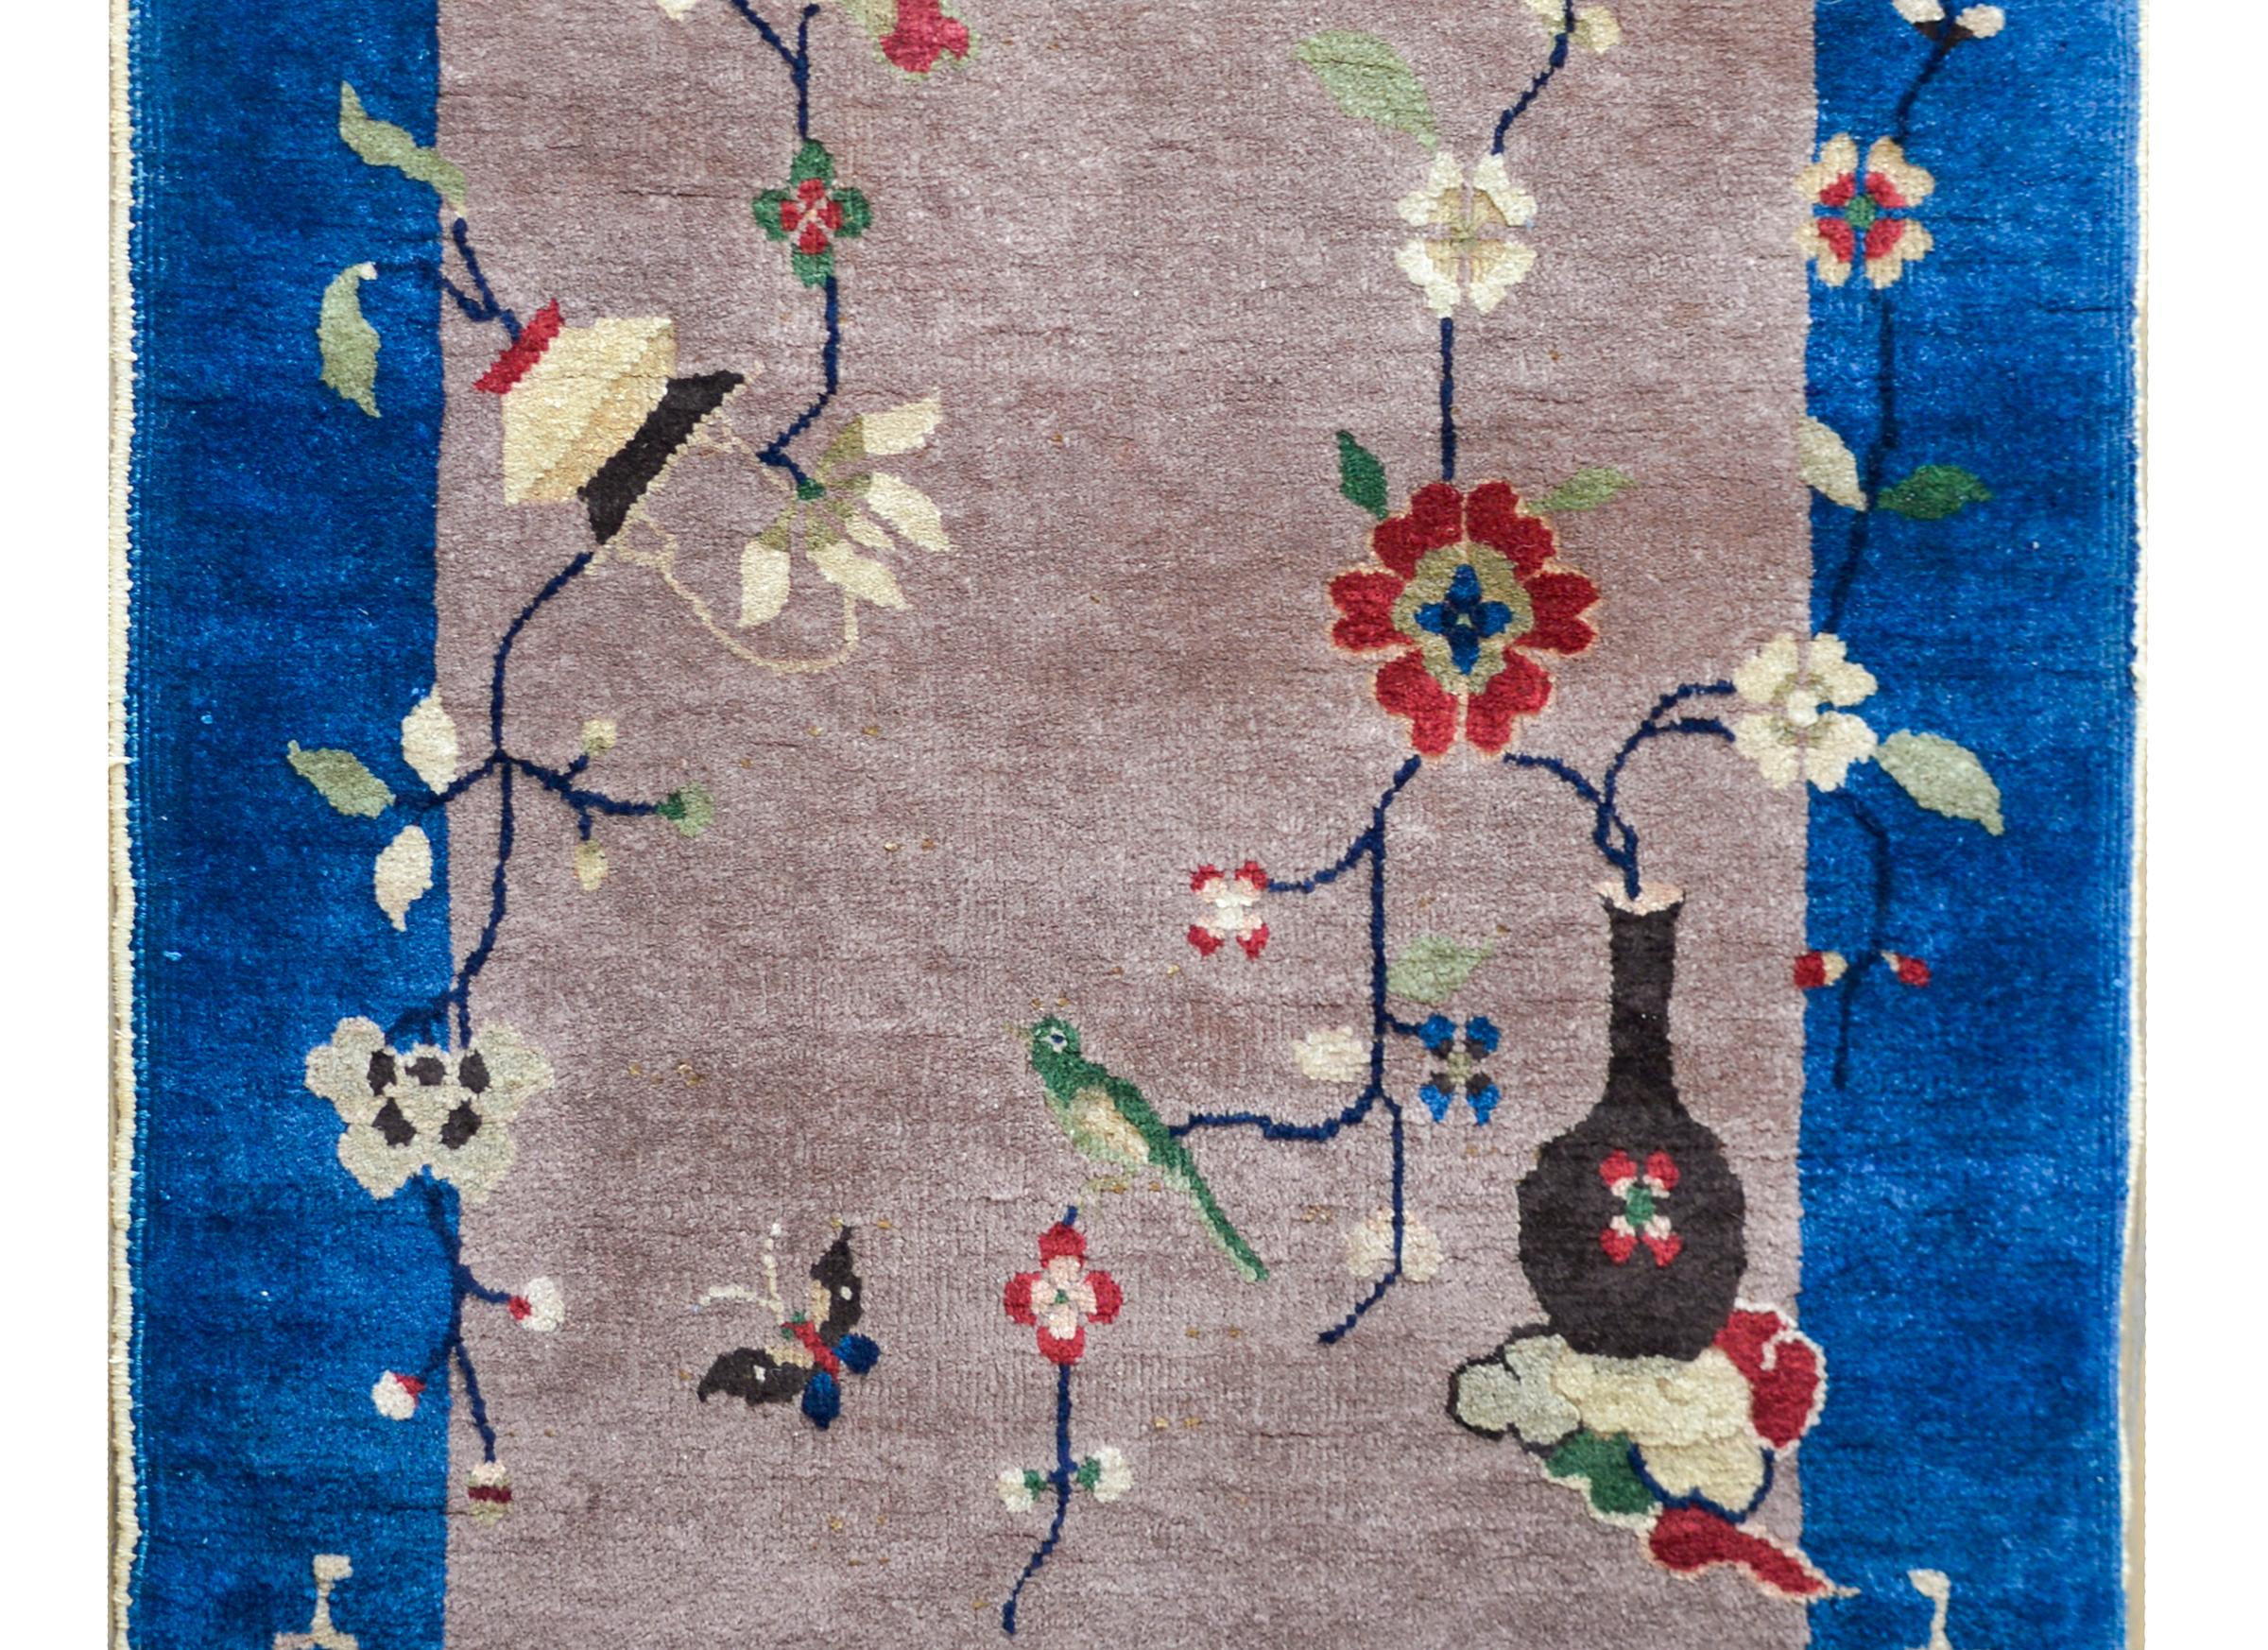 A beautiful early 20th century Chinese Art Deco rug with a gray field surrounded by a wide royal blue border. Overlaid across the entire rug are two vases potted with auspicious flowers including peonies, chrysanthemum, and prunus blossoms.